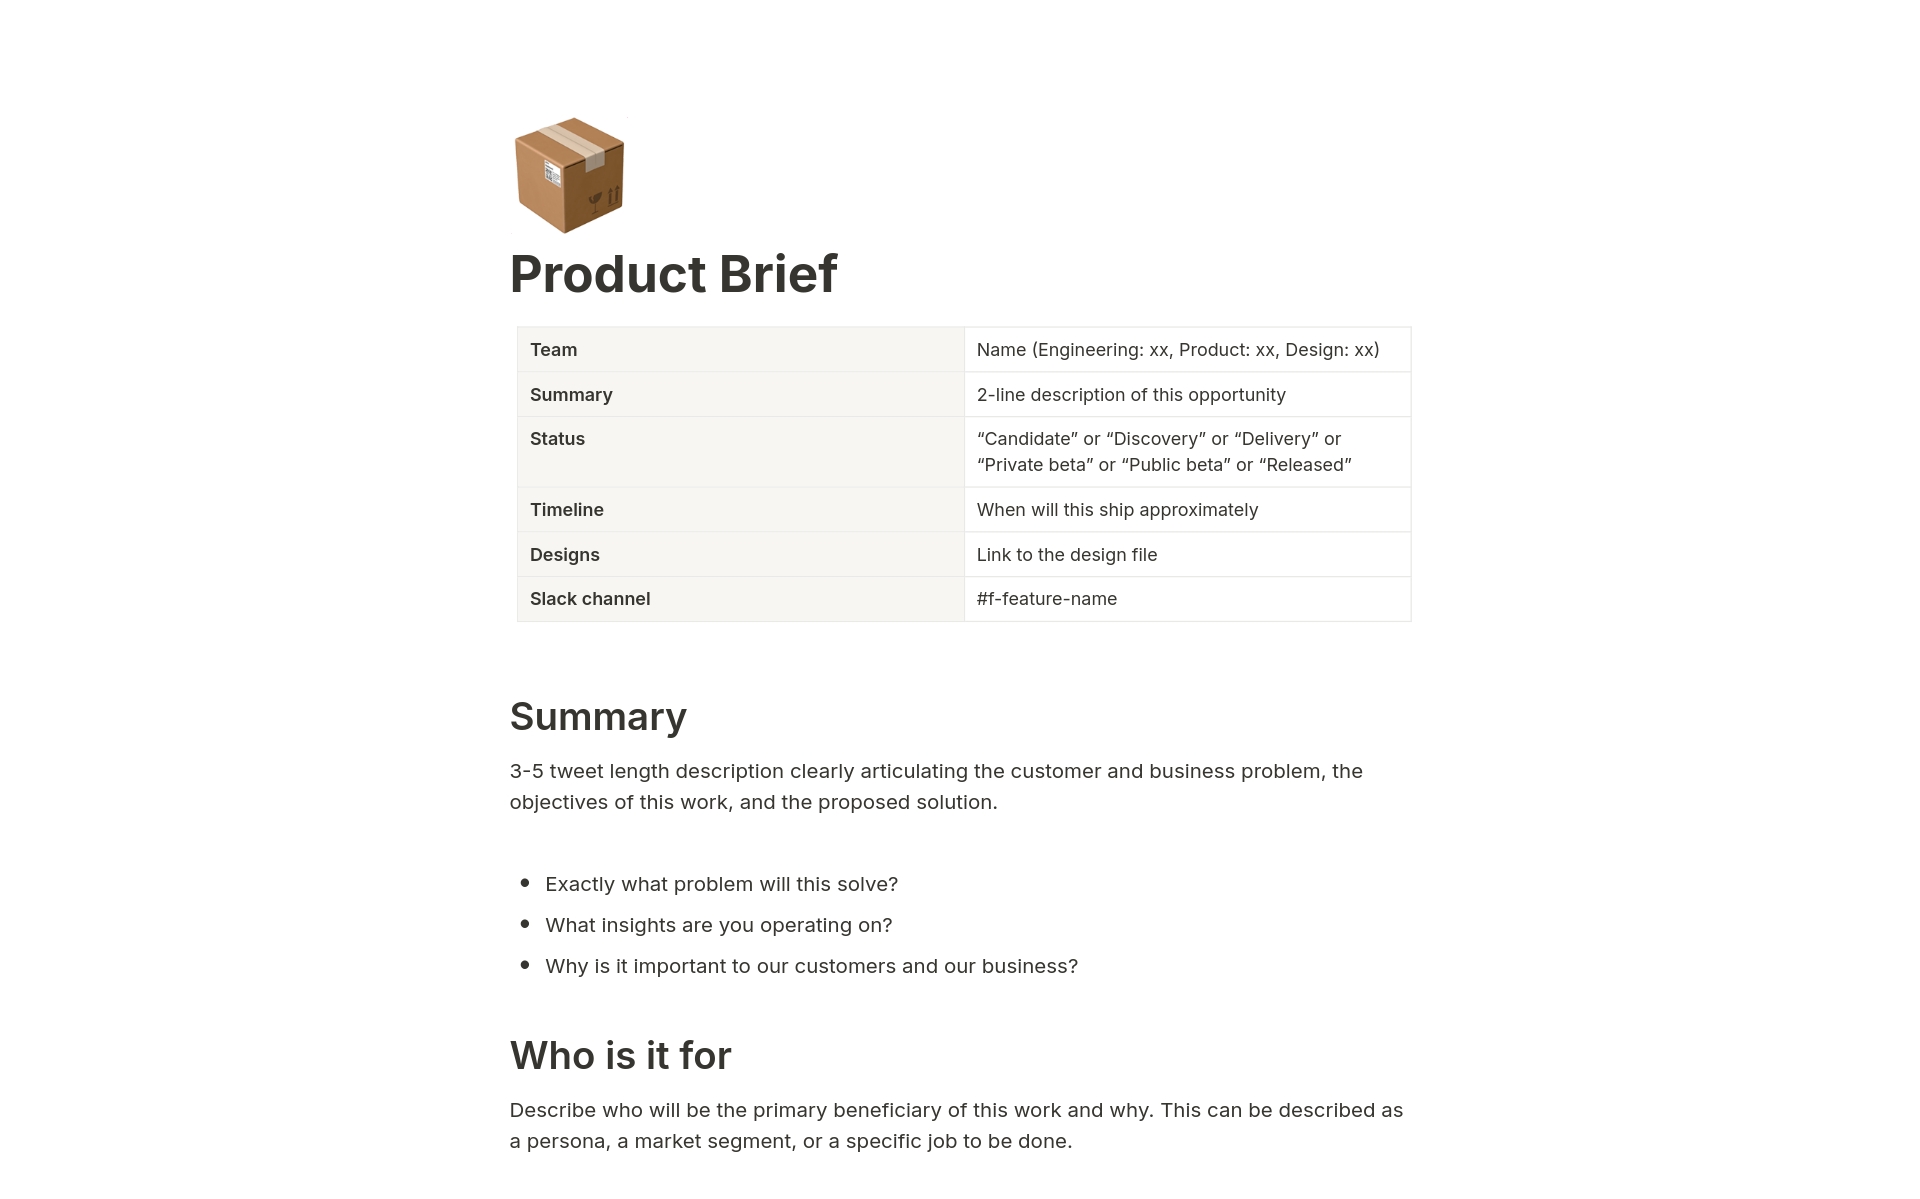 Use this Product Brief template to ensure alignment at the right moments and prevent any misaligned expectations around the problem, scope, and timeline. It also enables you to gather feedback, improve your thinking, and leverage any knowledge floating in the organization.